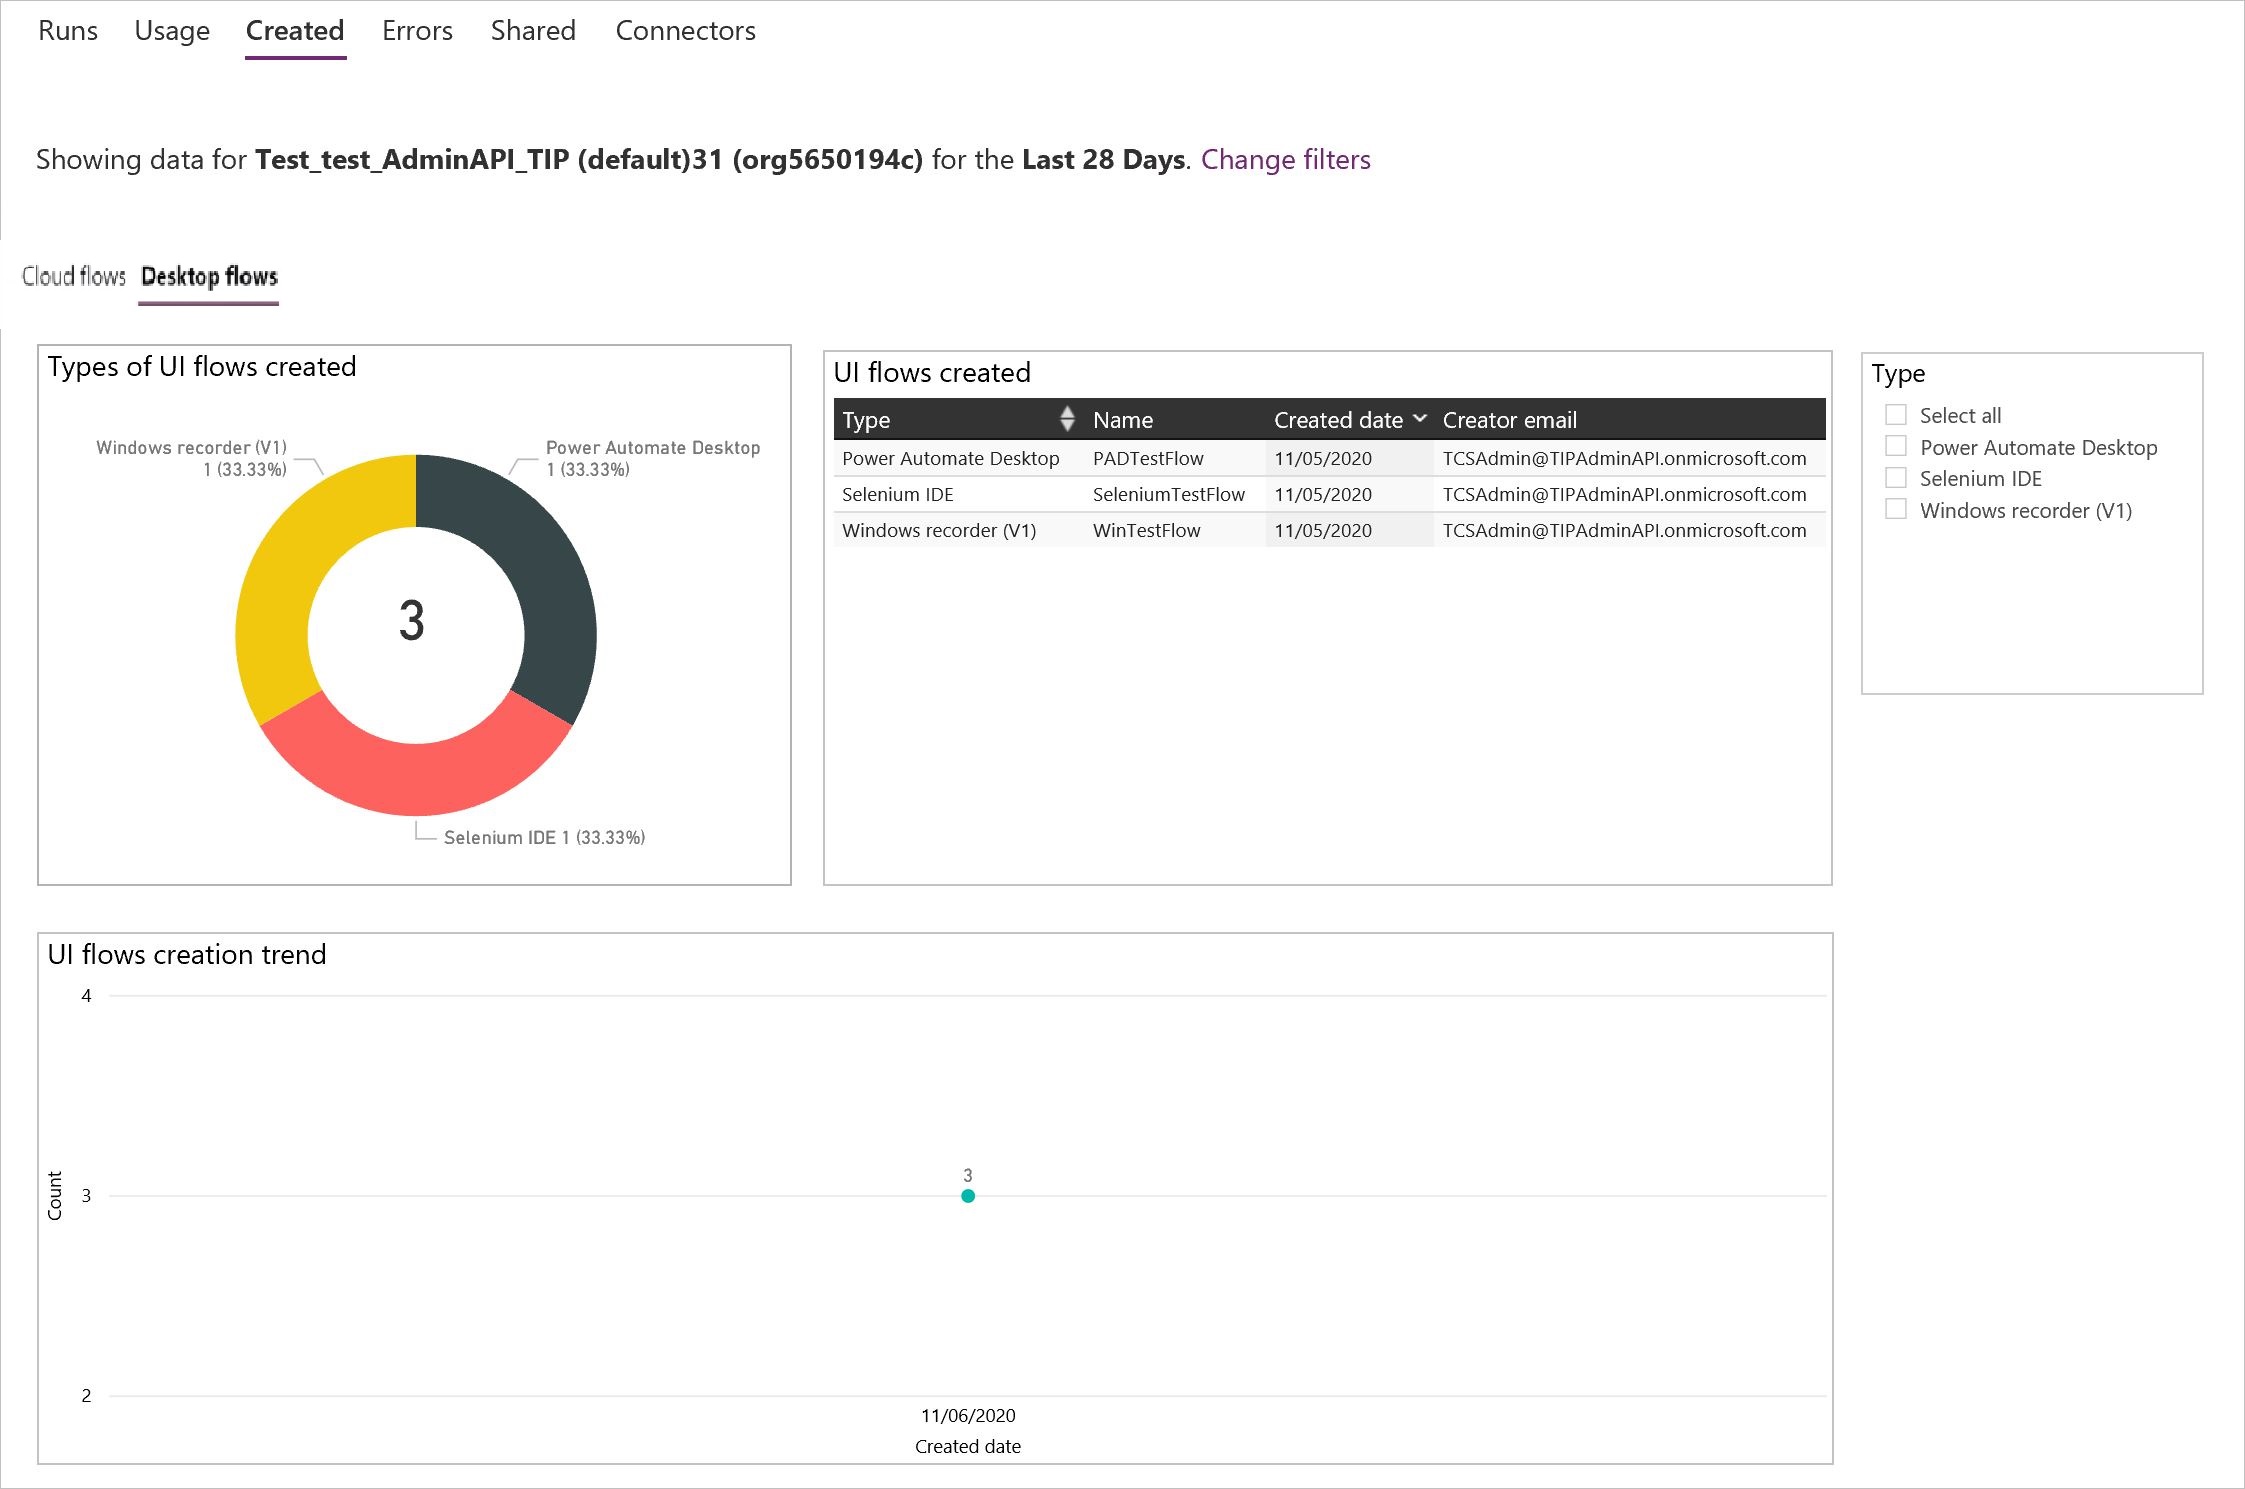 A screenshot of the desktop flow created reports.